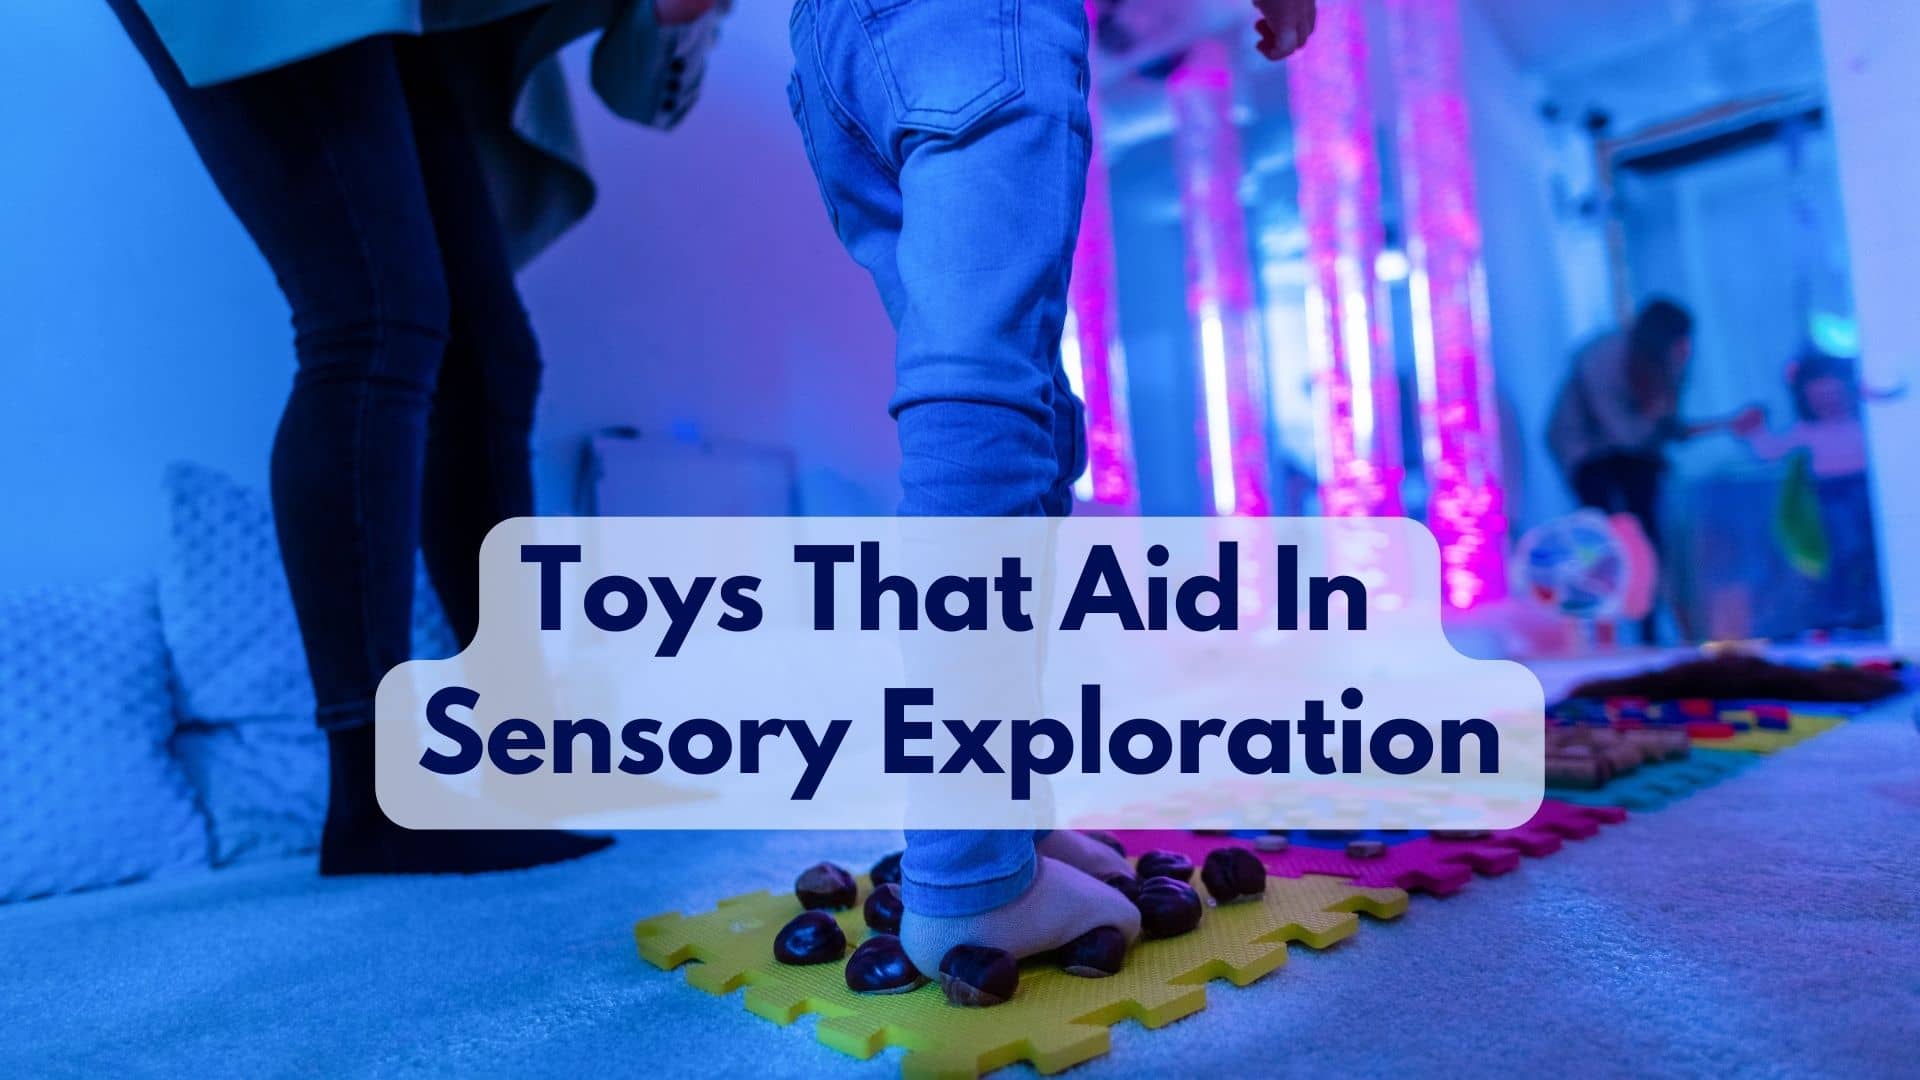 What Are Some Toys That Aid In Sensory Exploration?